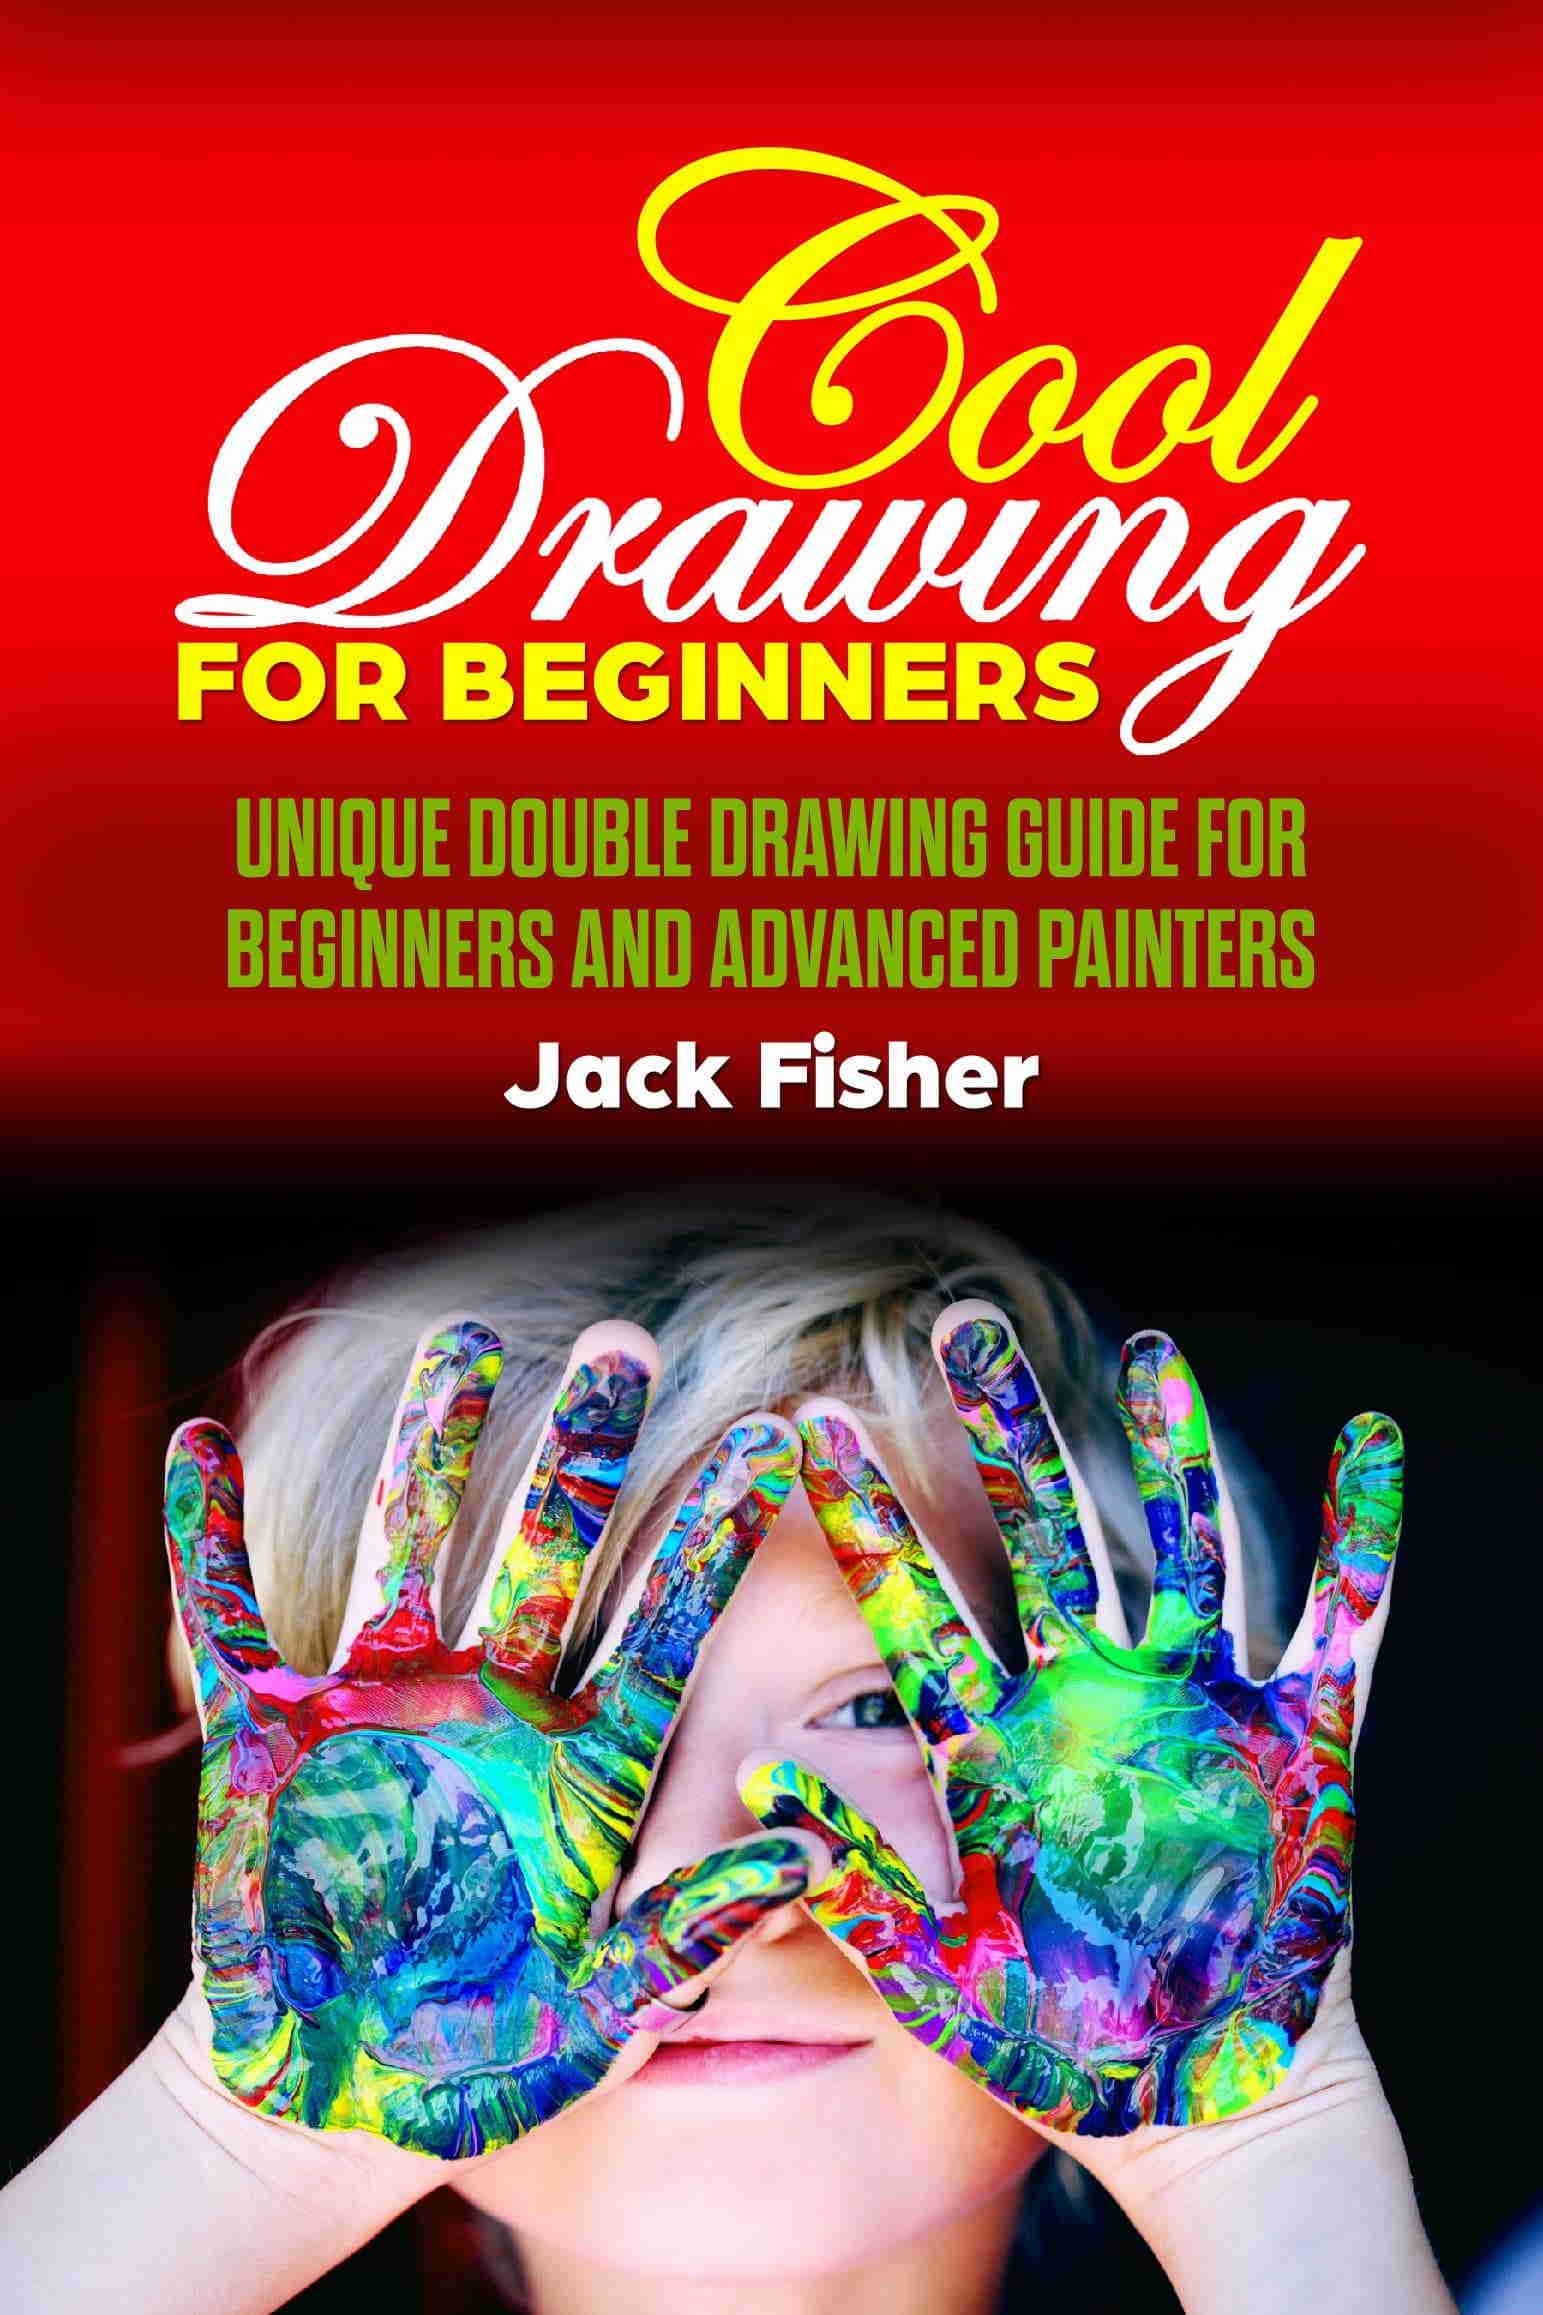 FREE: COOL DRAWING FOR BEGINNERS by JACK FISHER